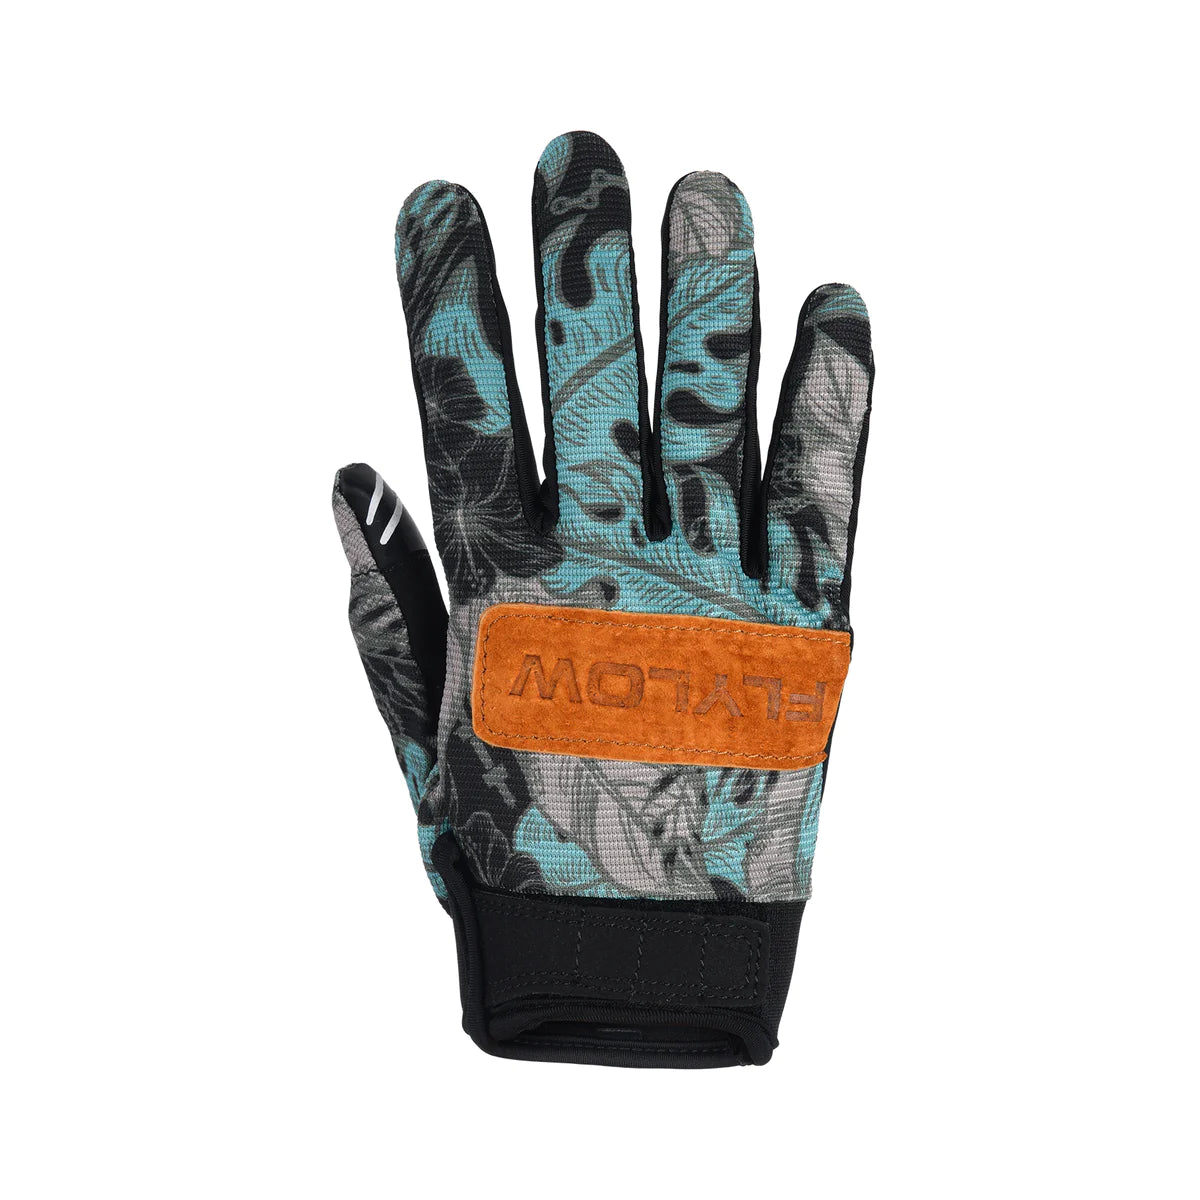 Flylow Dirt Glove black, teal and leather patch leaf pattern